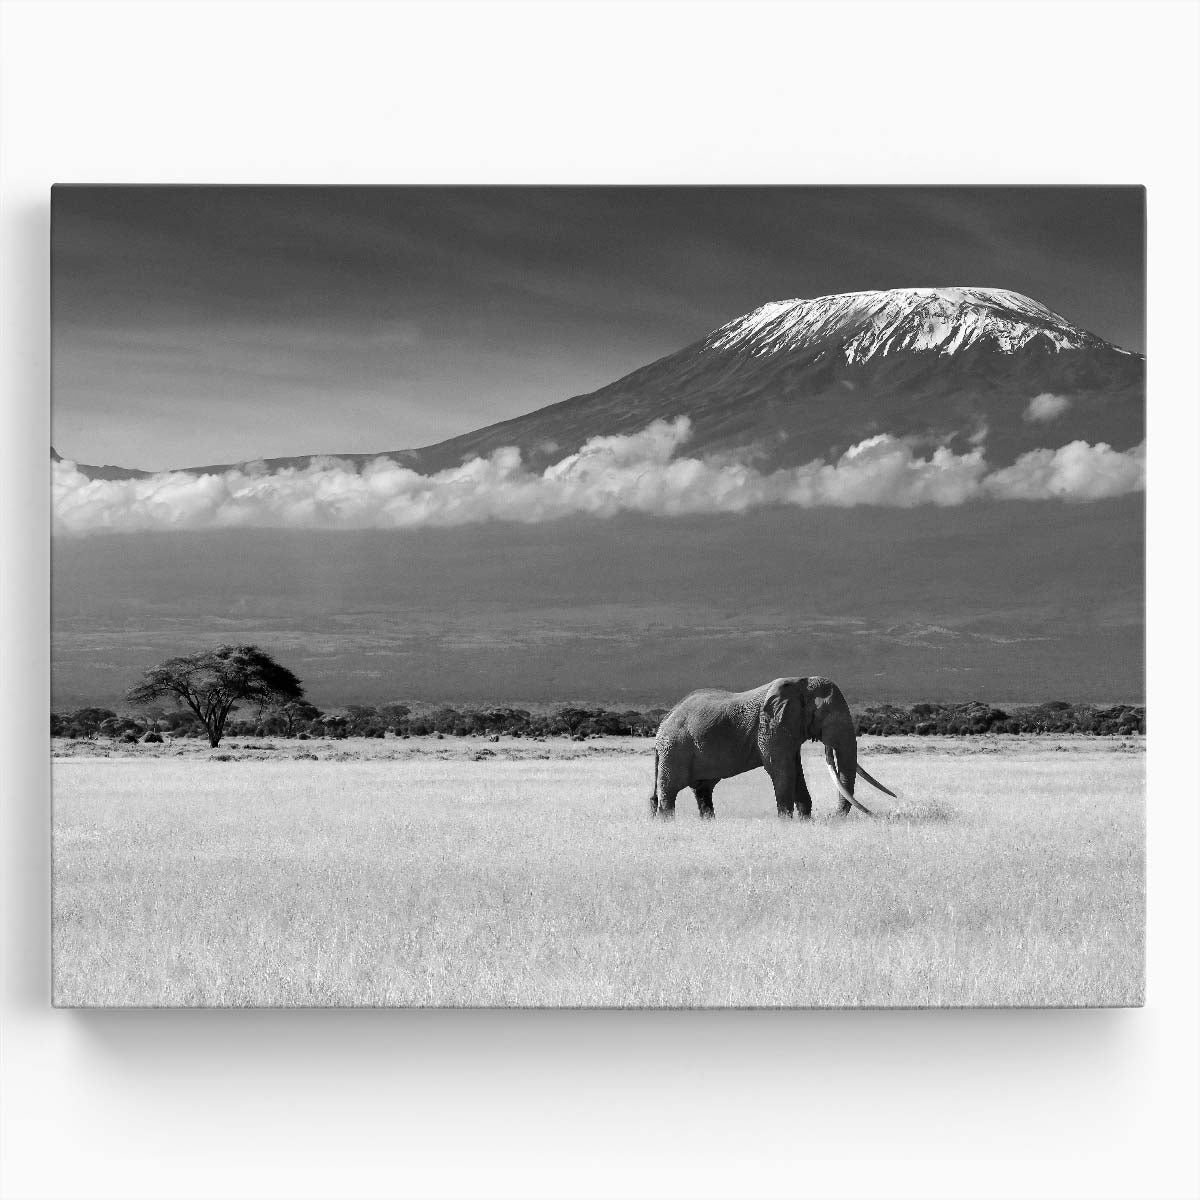 Majestic African Elephant & Kilimanjaro Wall Art by Luxuriance Designs. Made in USA.